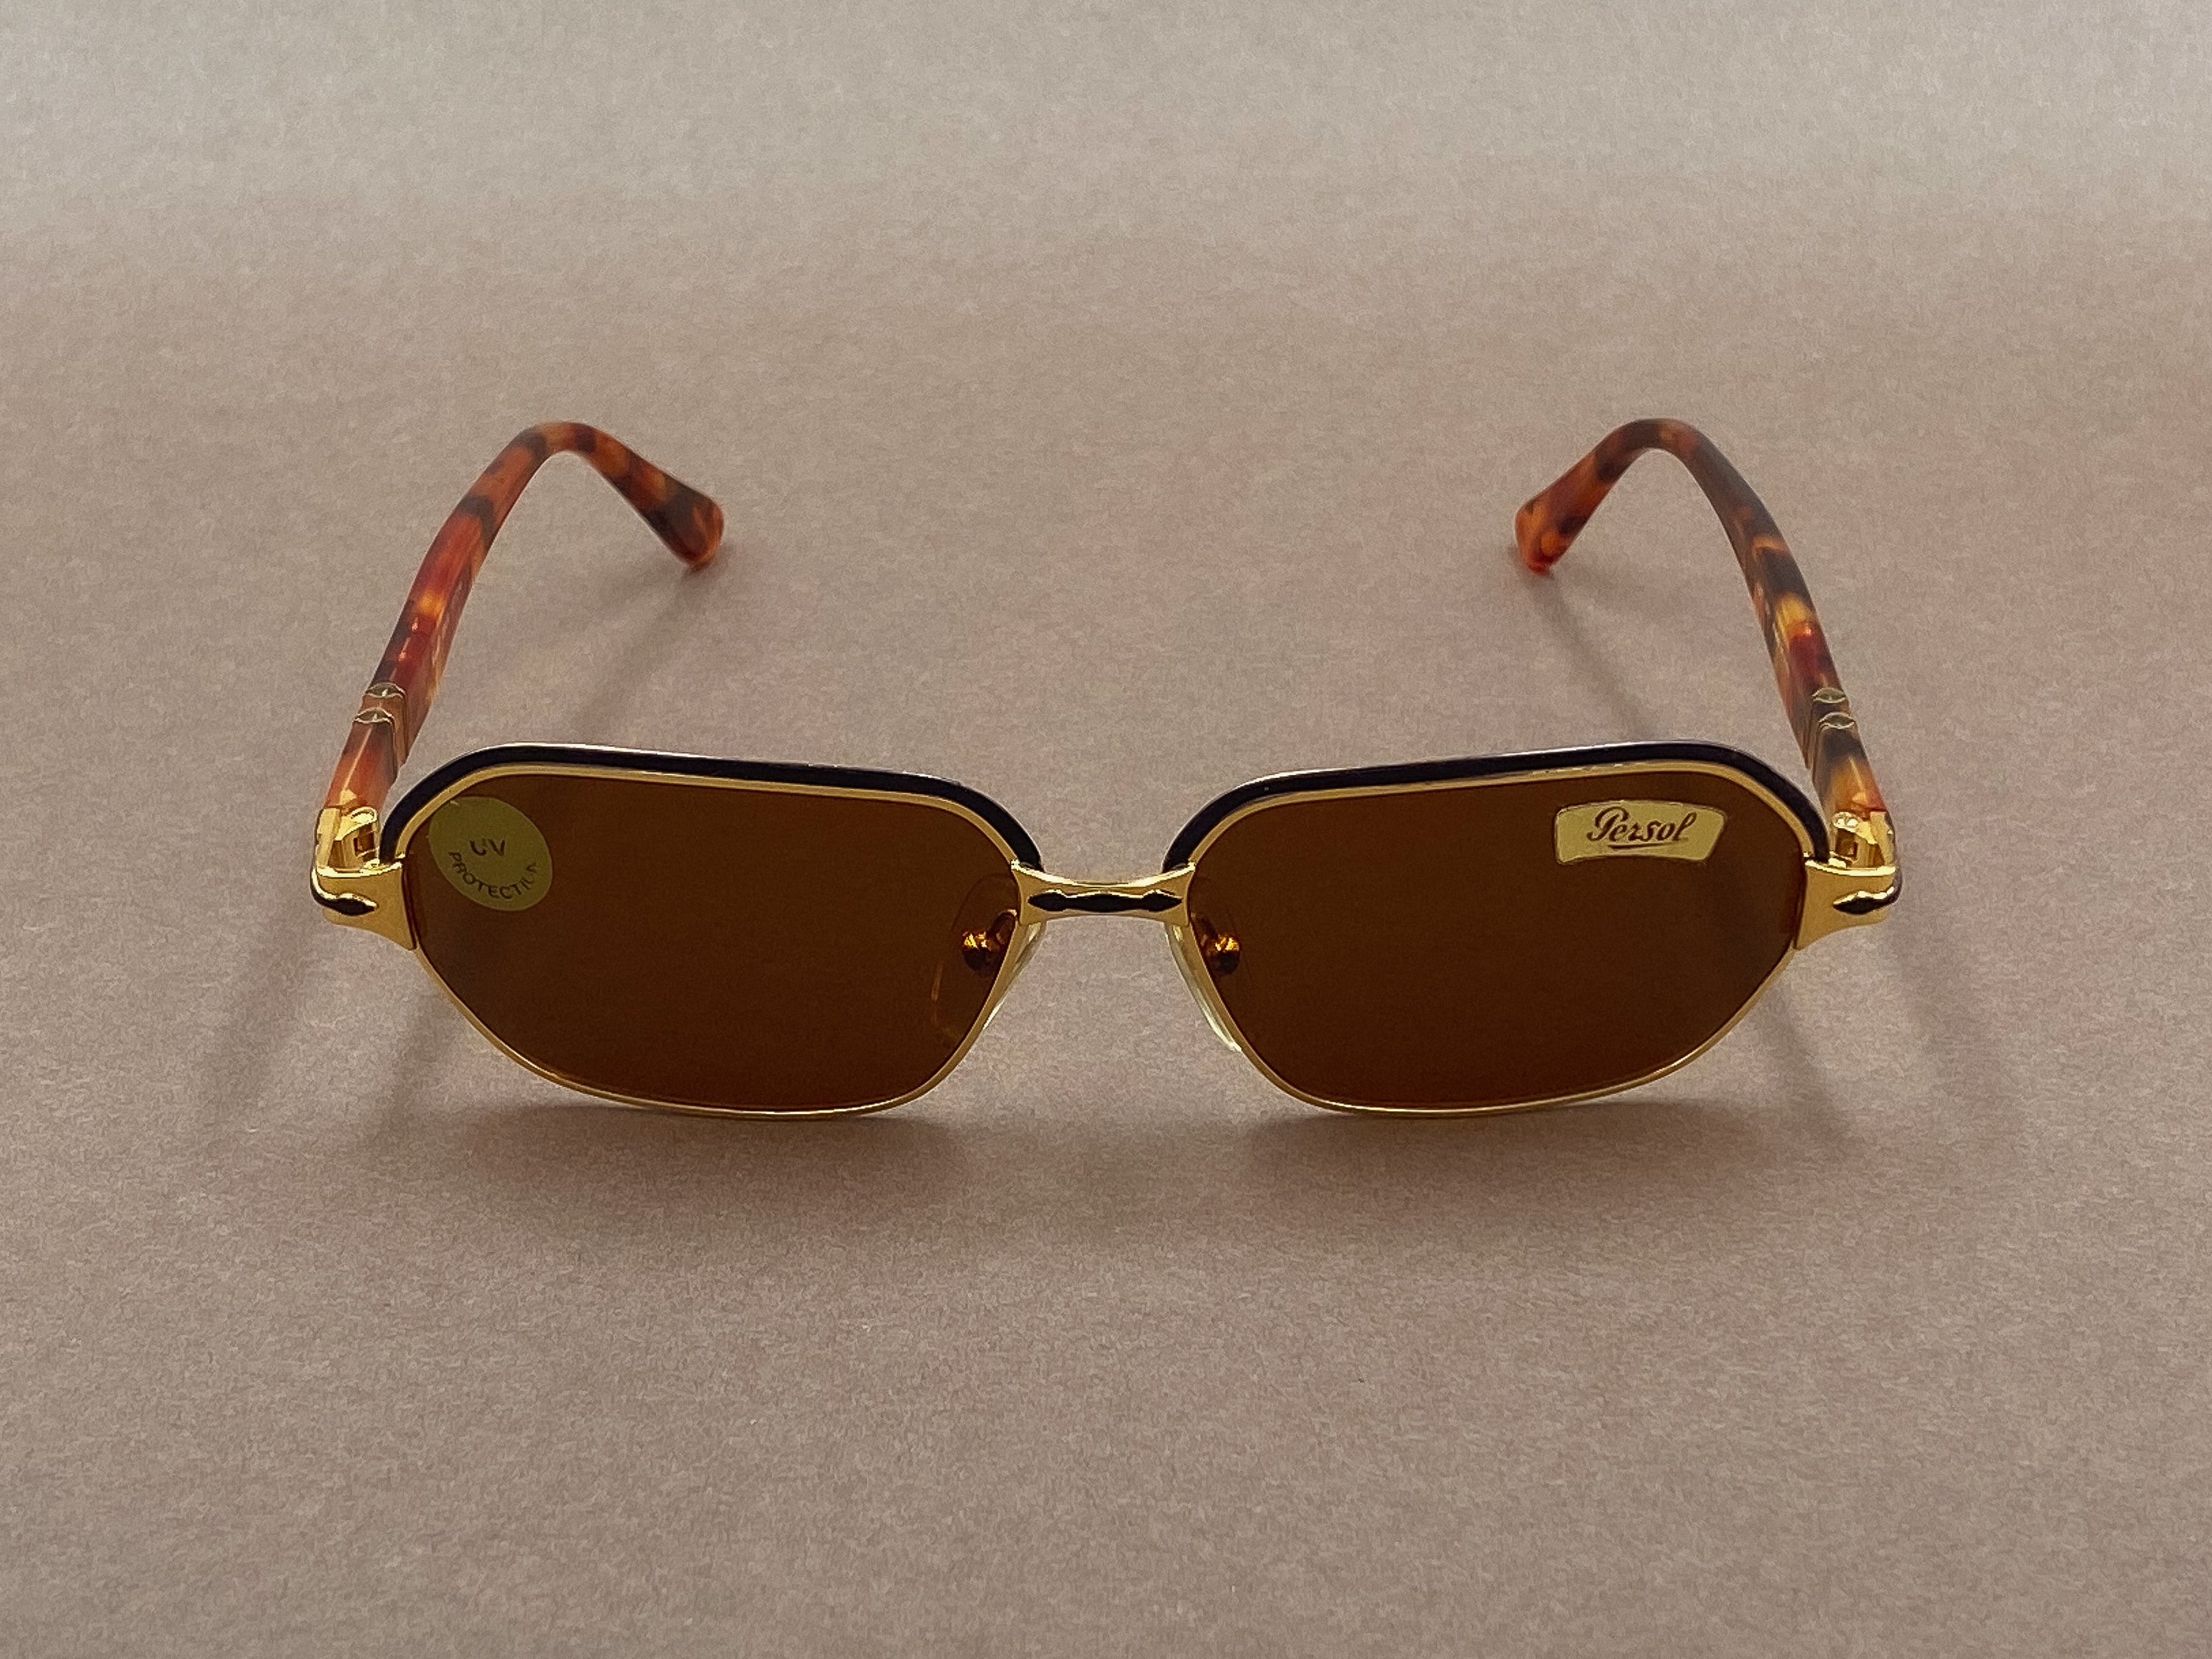 Persol Zeus sunglasses from the Mythis collection